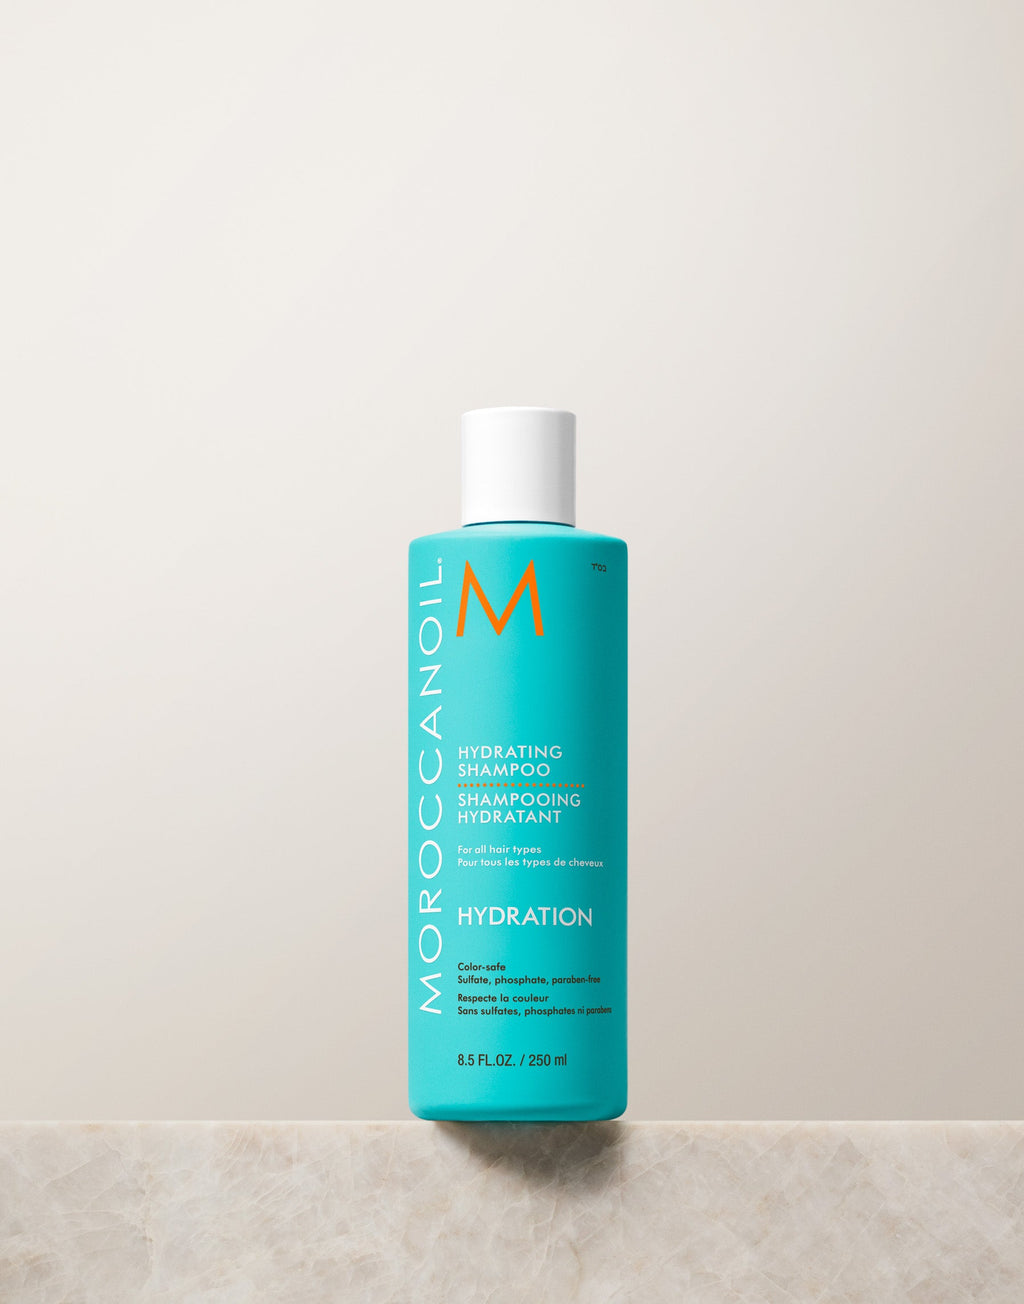 Hydrating Shampoo For all hair types